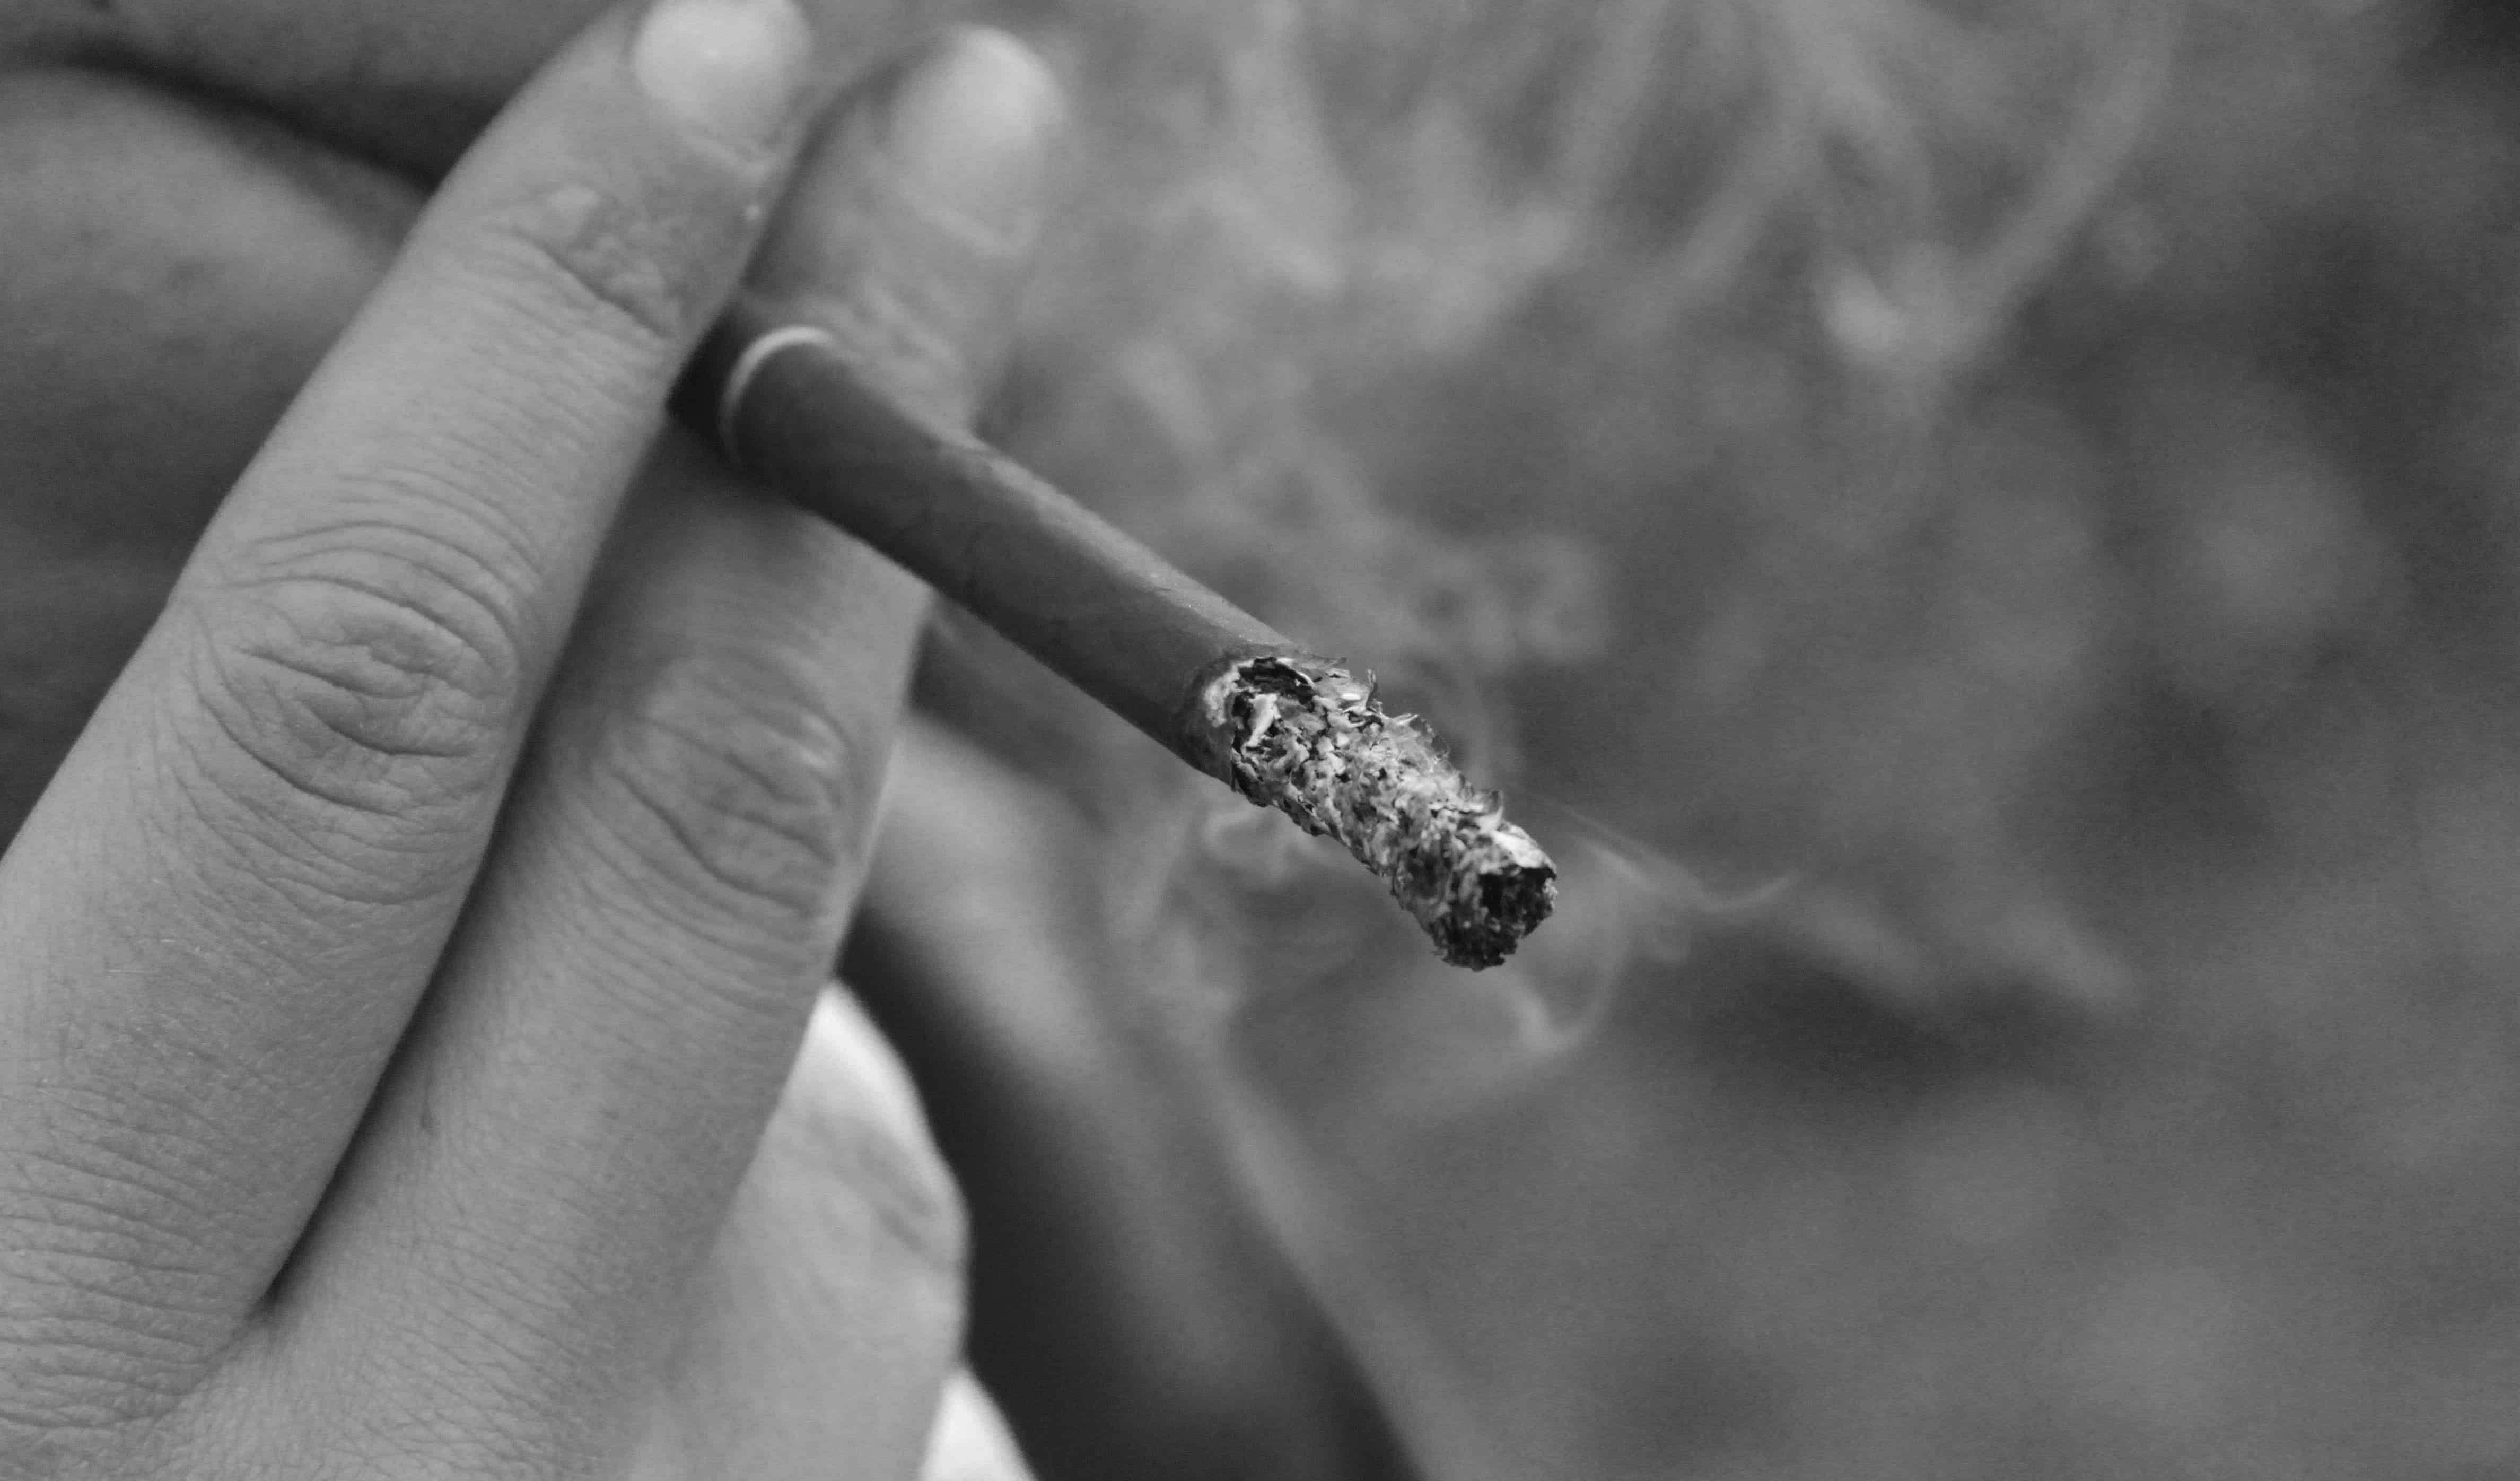 Cigarettes are the main risk factor for cancer, researchers found. Image credits: Sophie Riches.